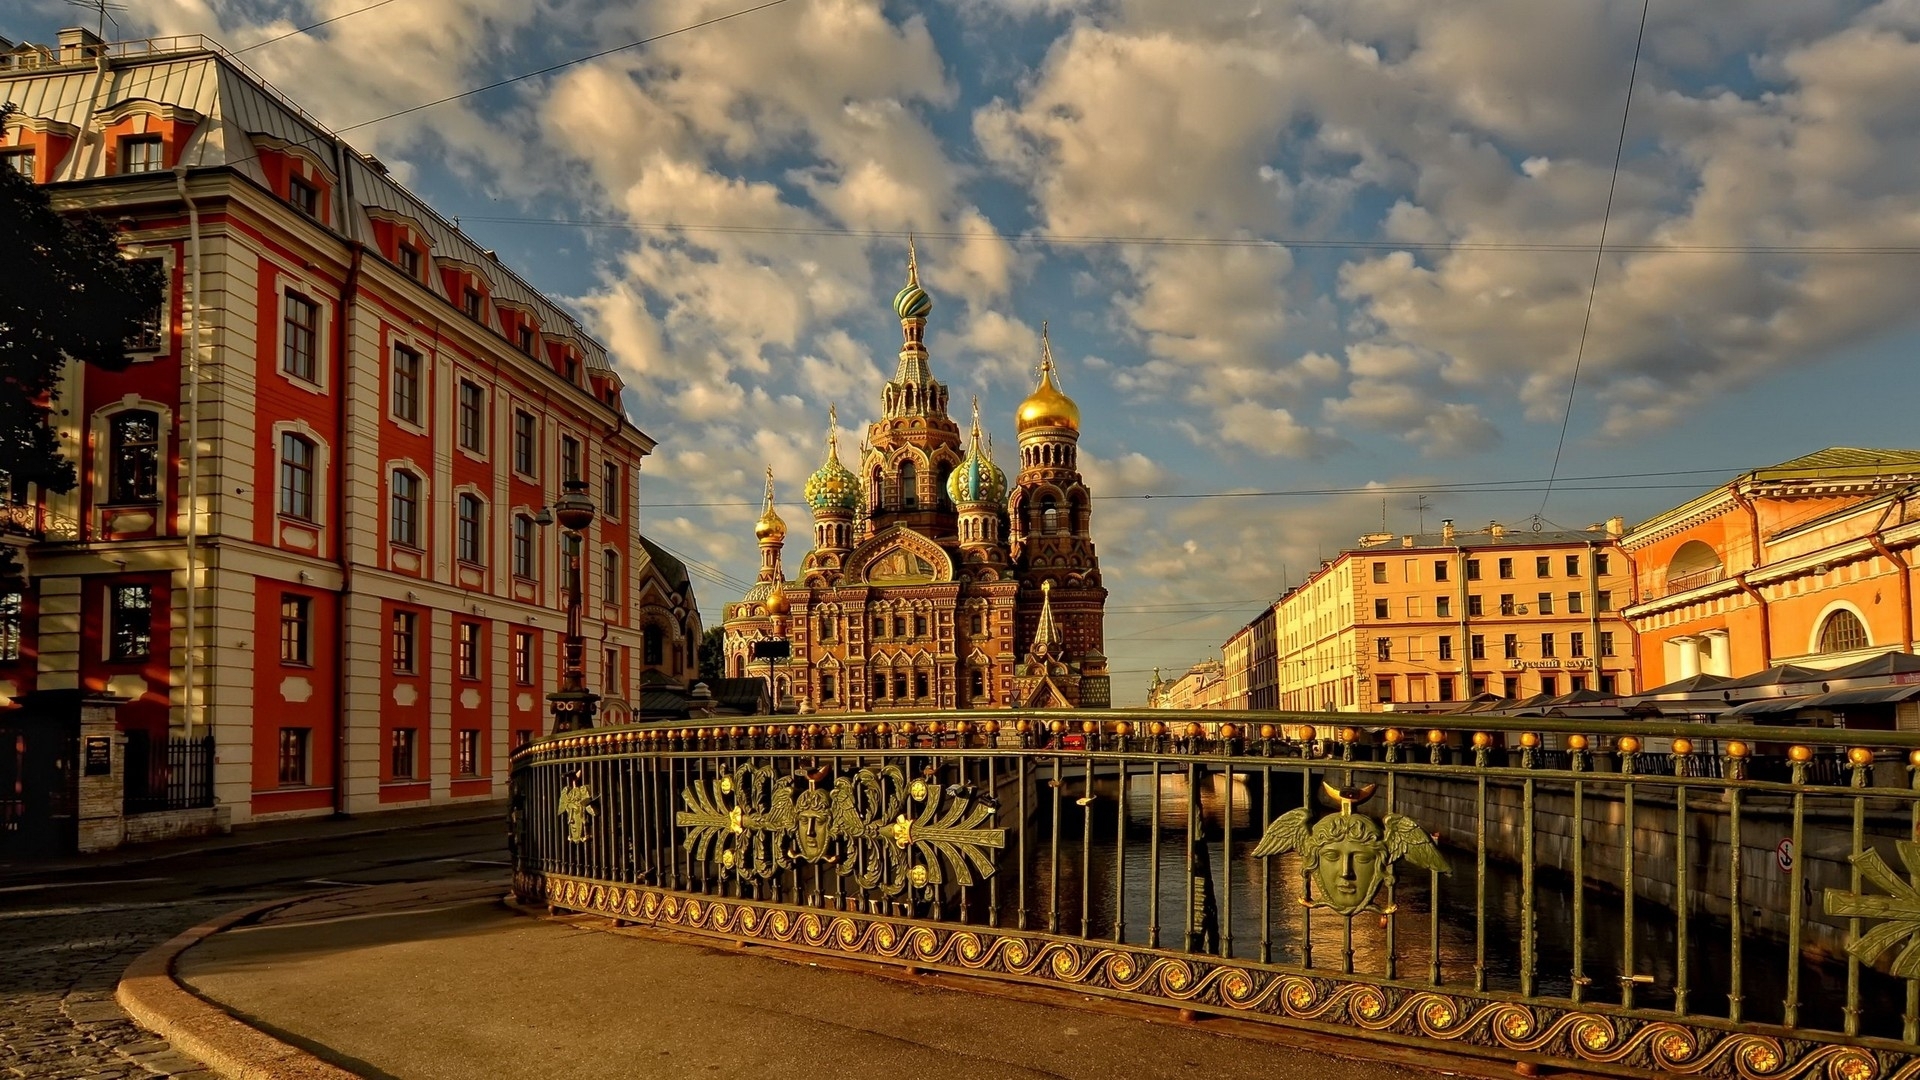 Culture and history of Saint Petersburg, Russia